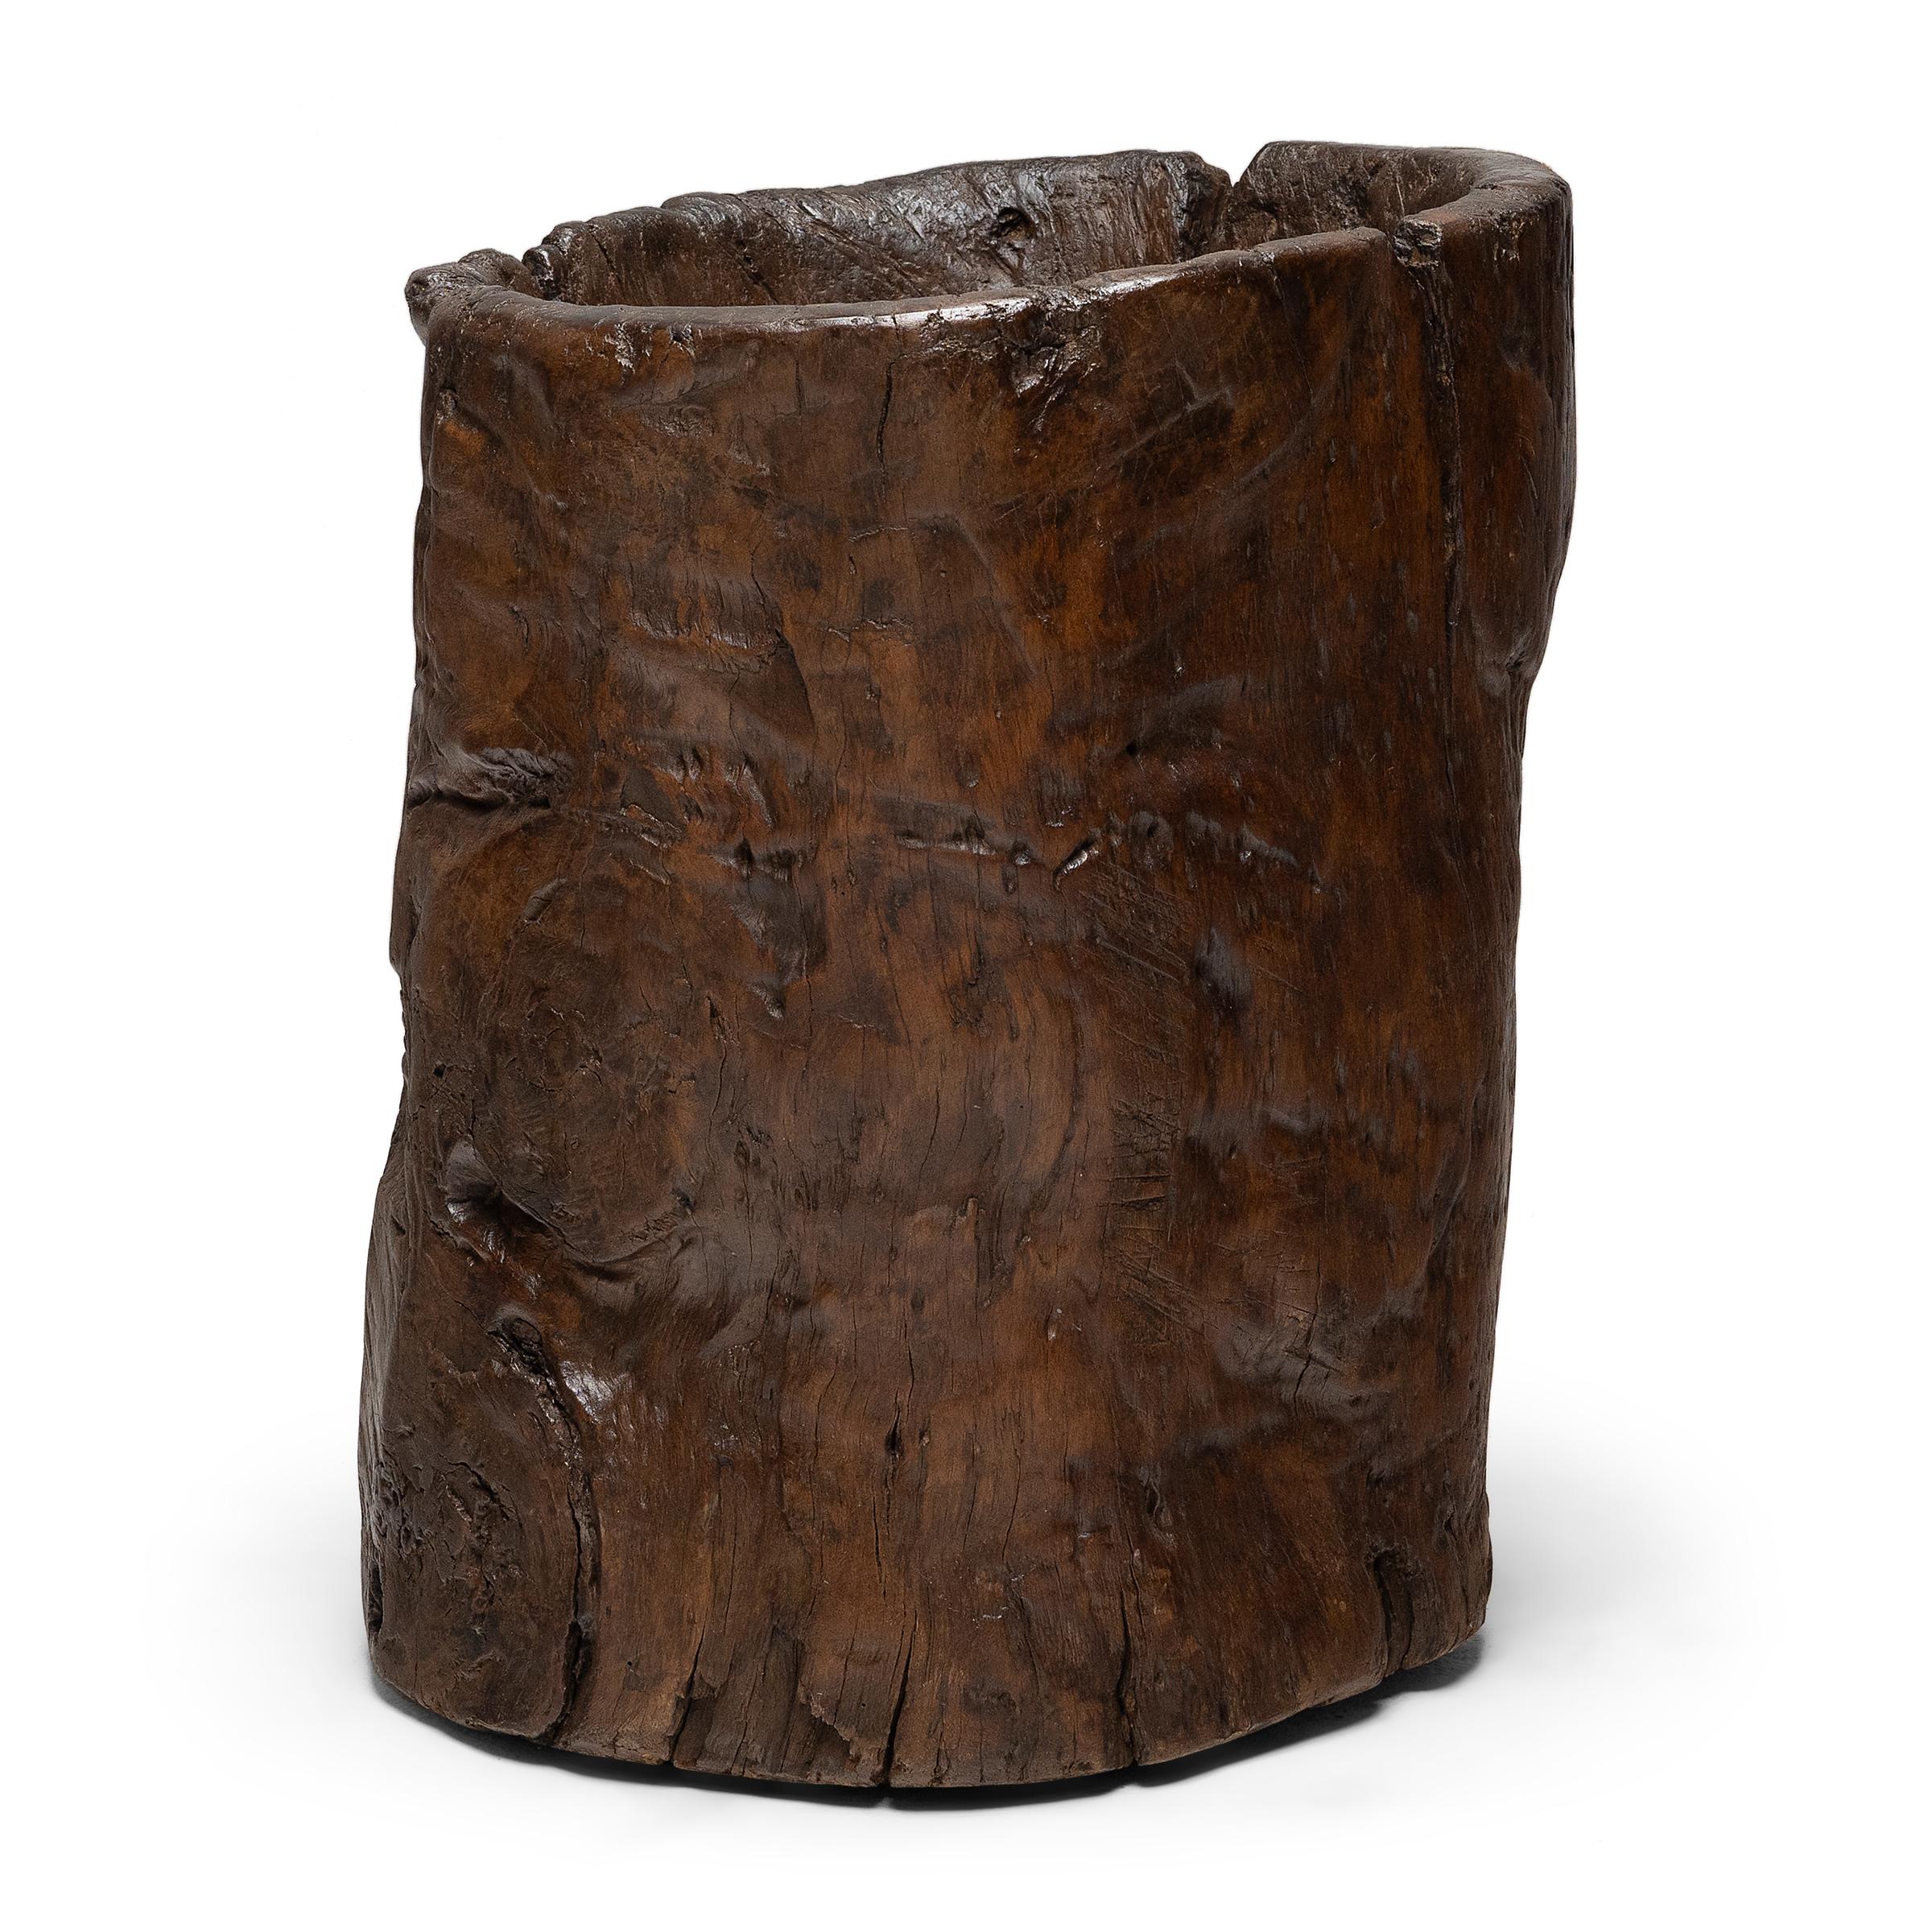 Hand-Carved Chinese Gnarled Trunk Mortar, c. 1850